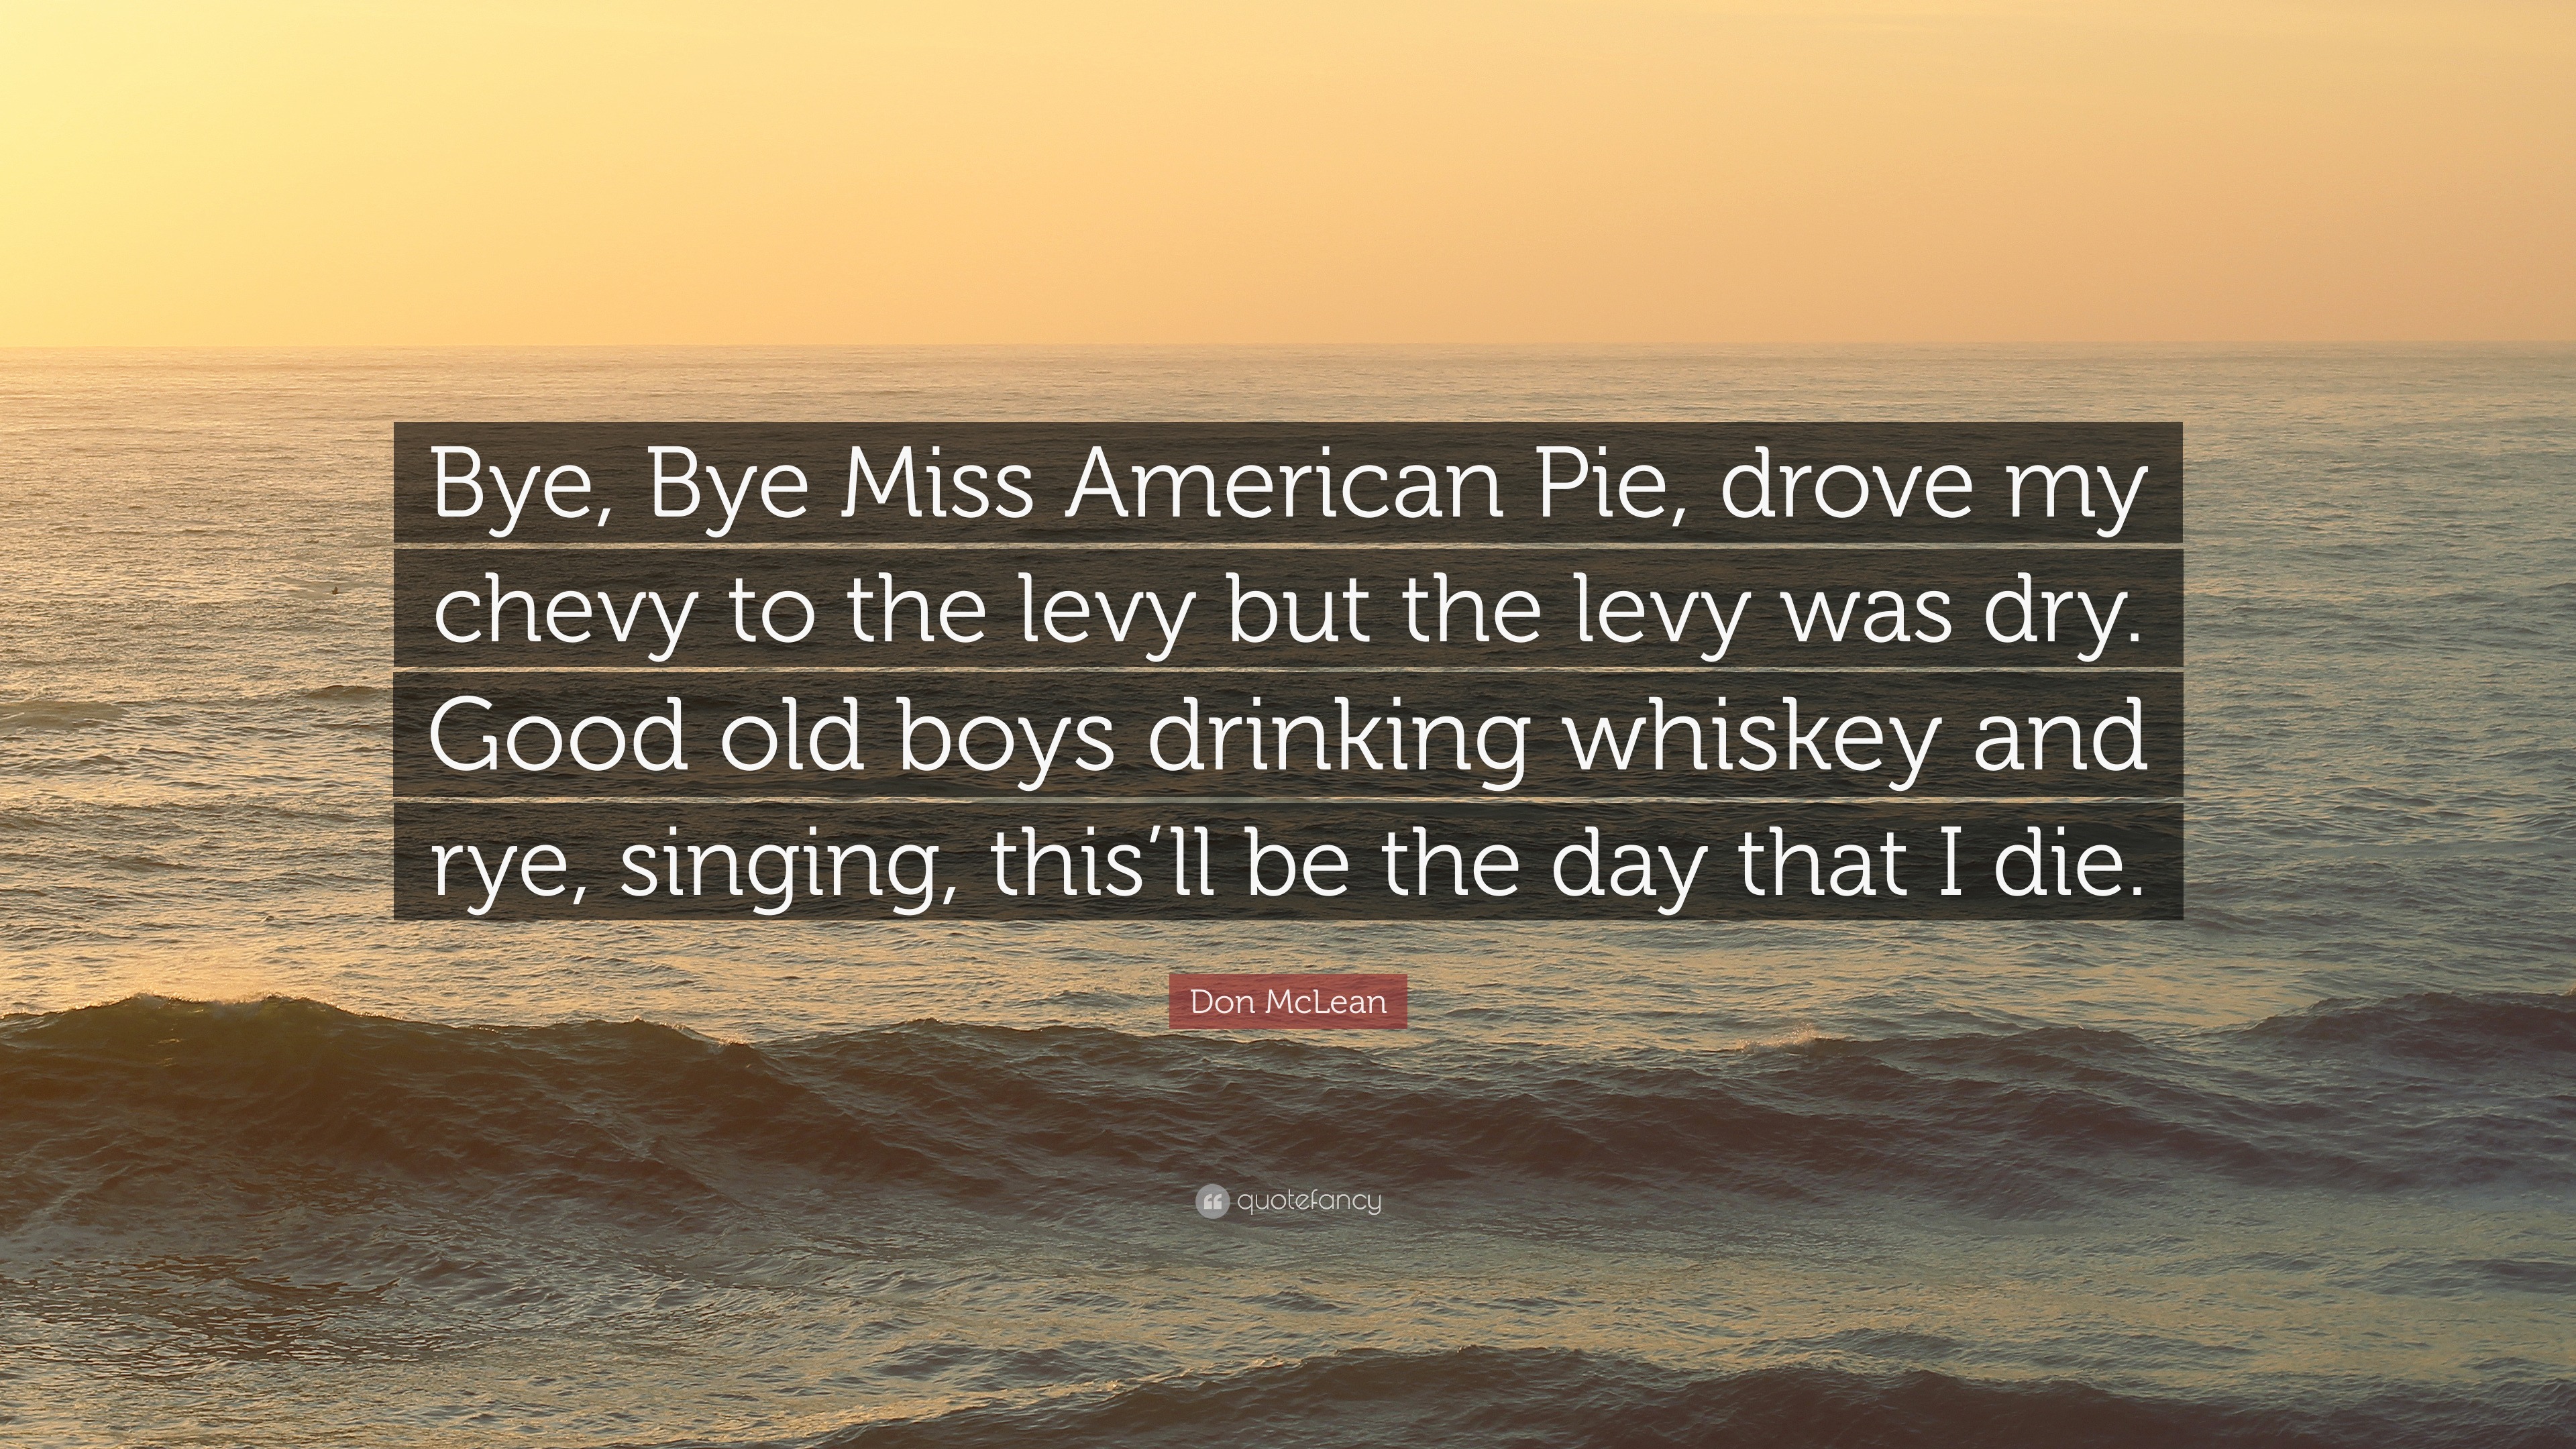 Don McLean Quote: “Bye, American Pie, drove my chevy to the levy but levy was dry. Good old drinking whiskey and rye, sin...”